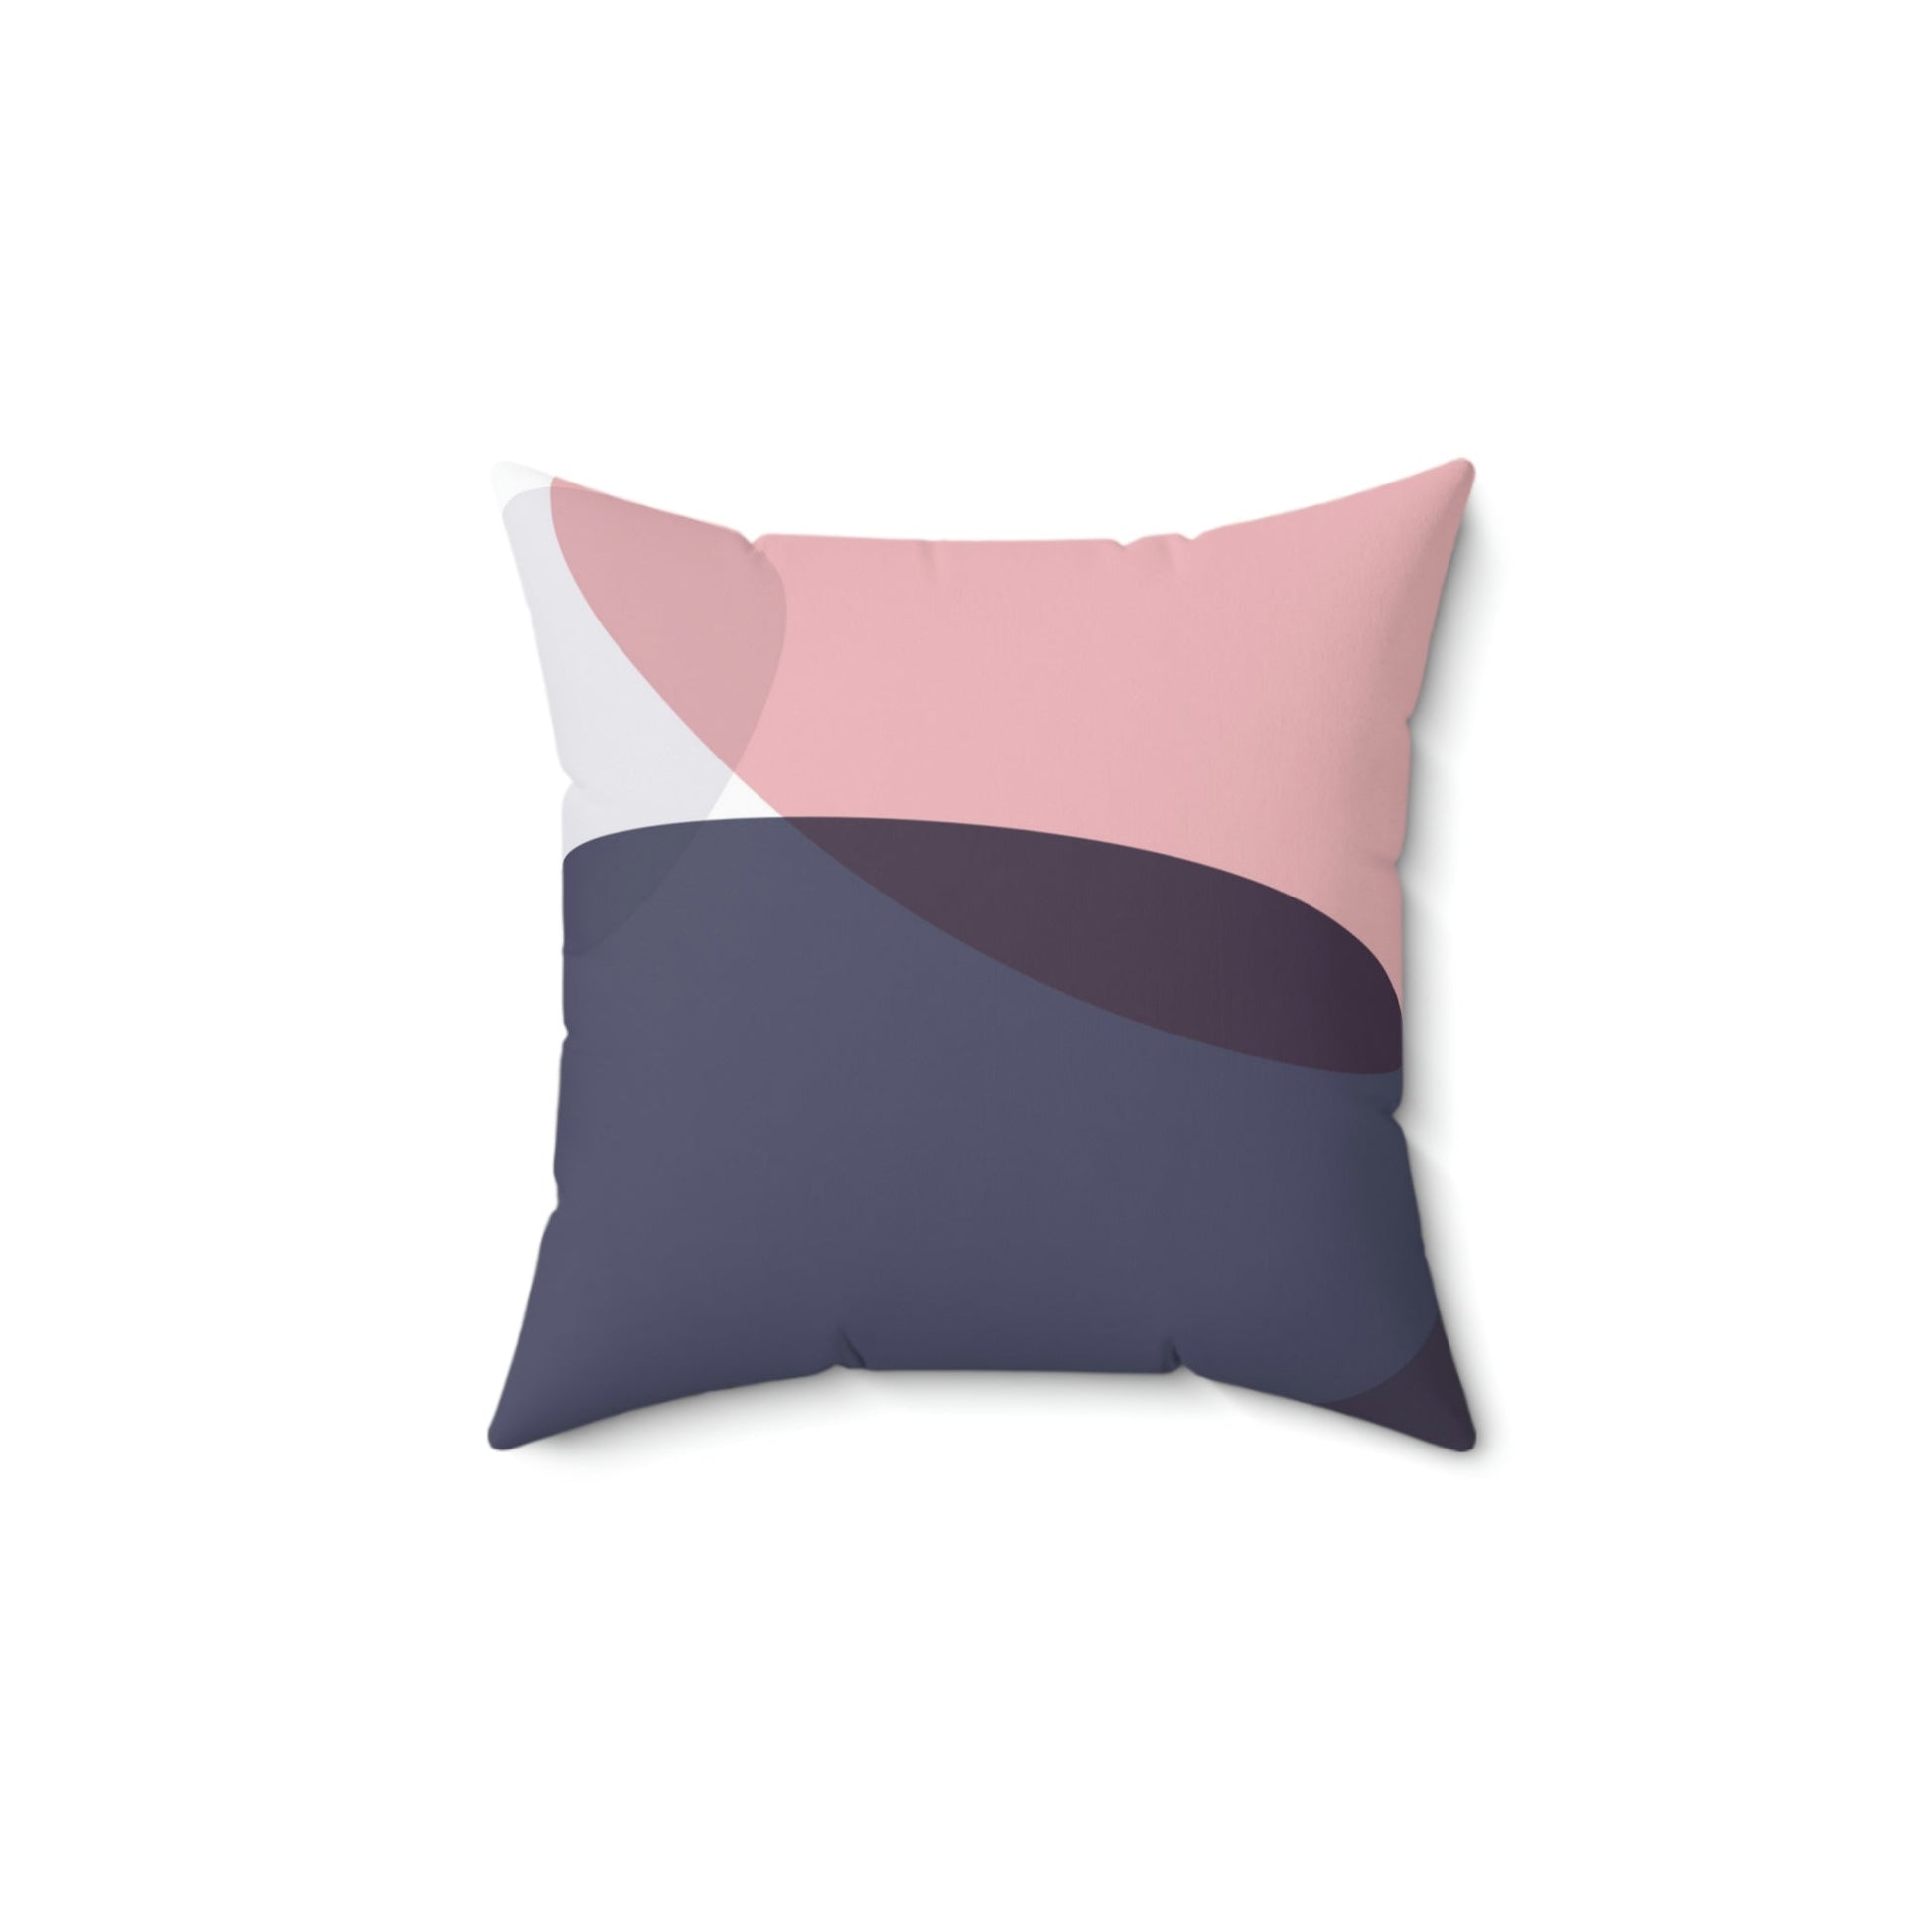 The Artistic One Square Pillow Home Decor Pink Sweetheart